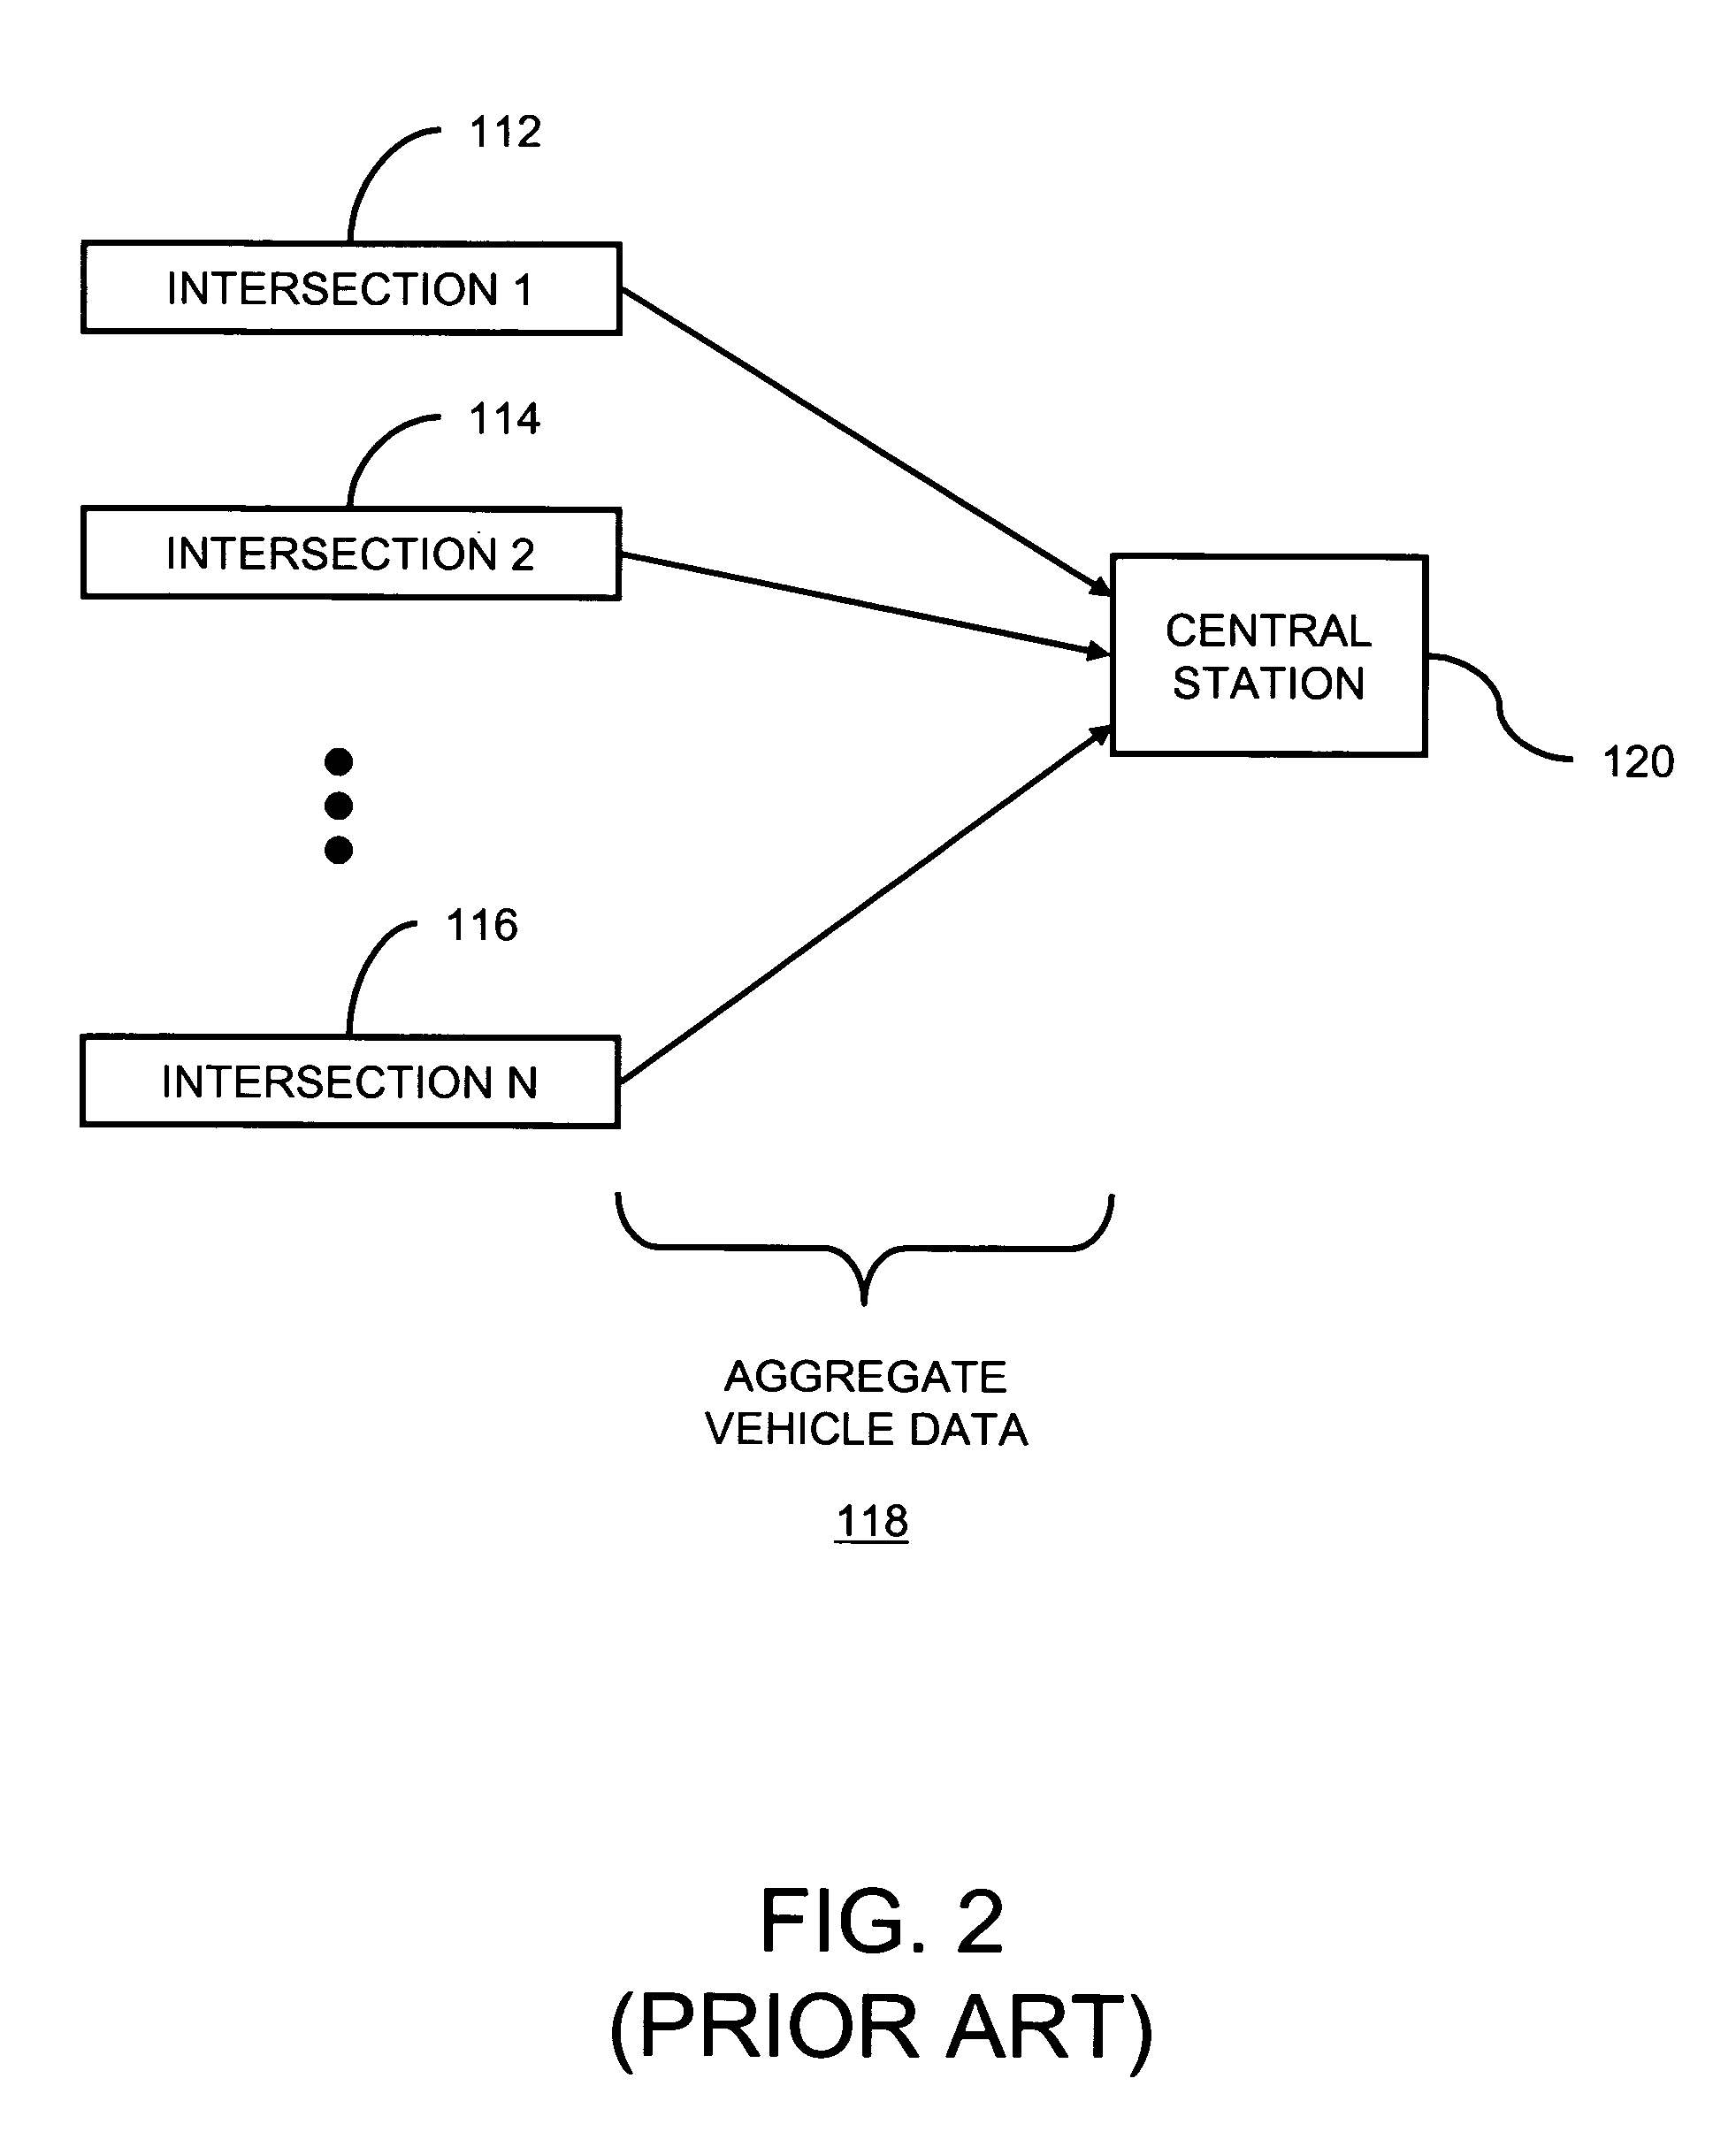 Method and system for collecting traffic data, monitoring traffic, and automated enforcement at a centralized station